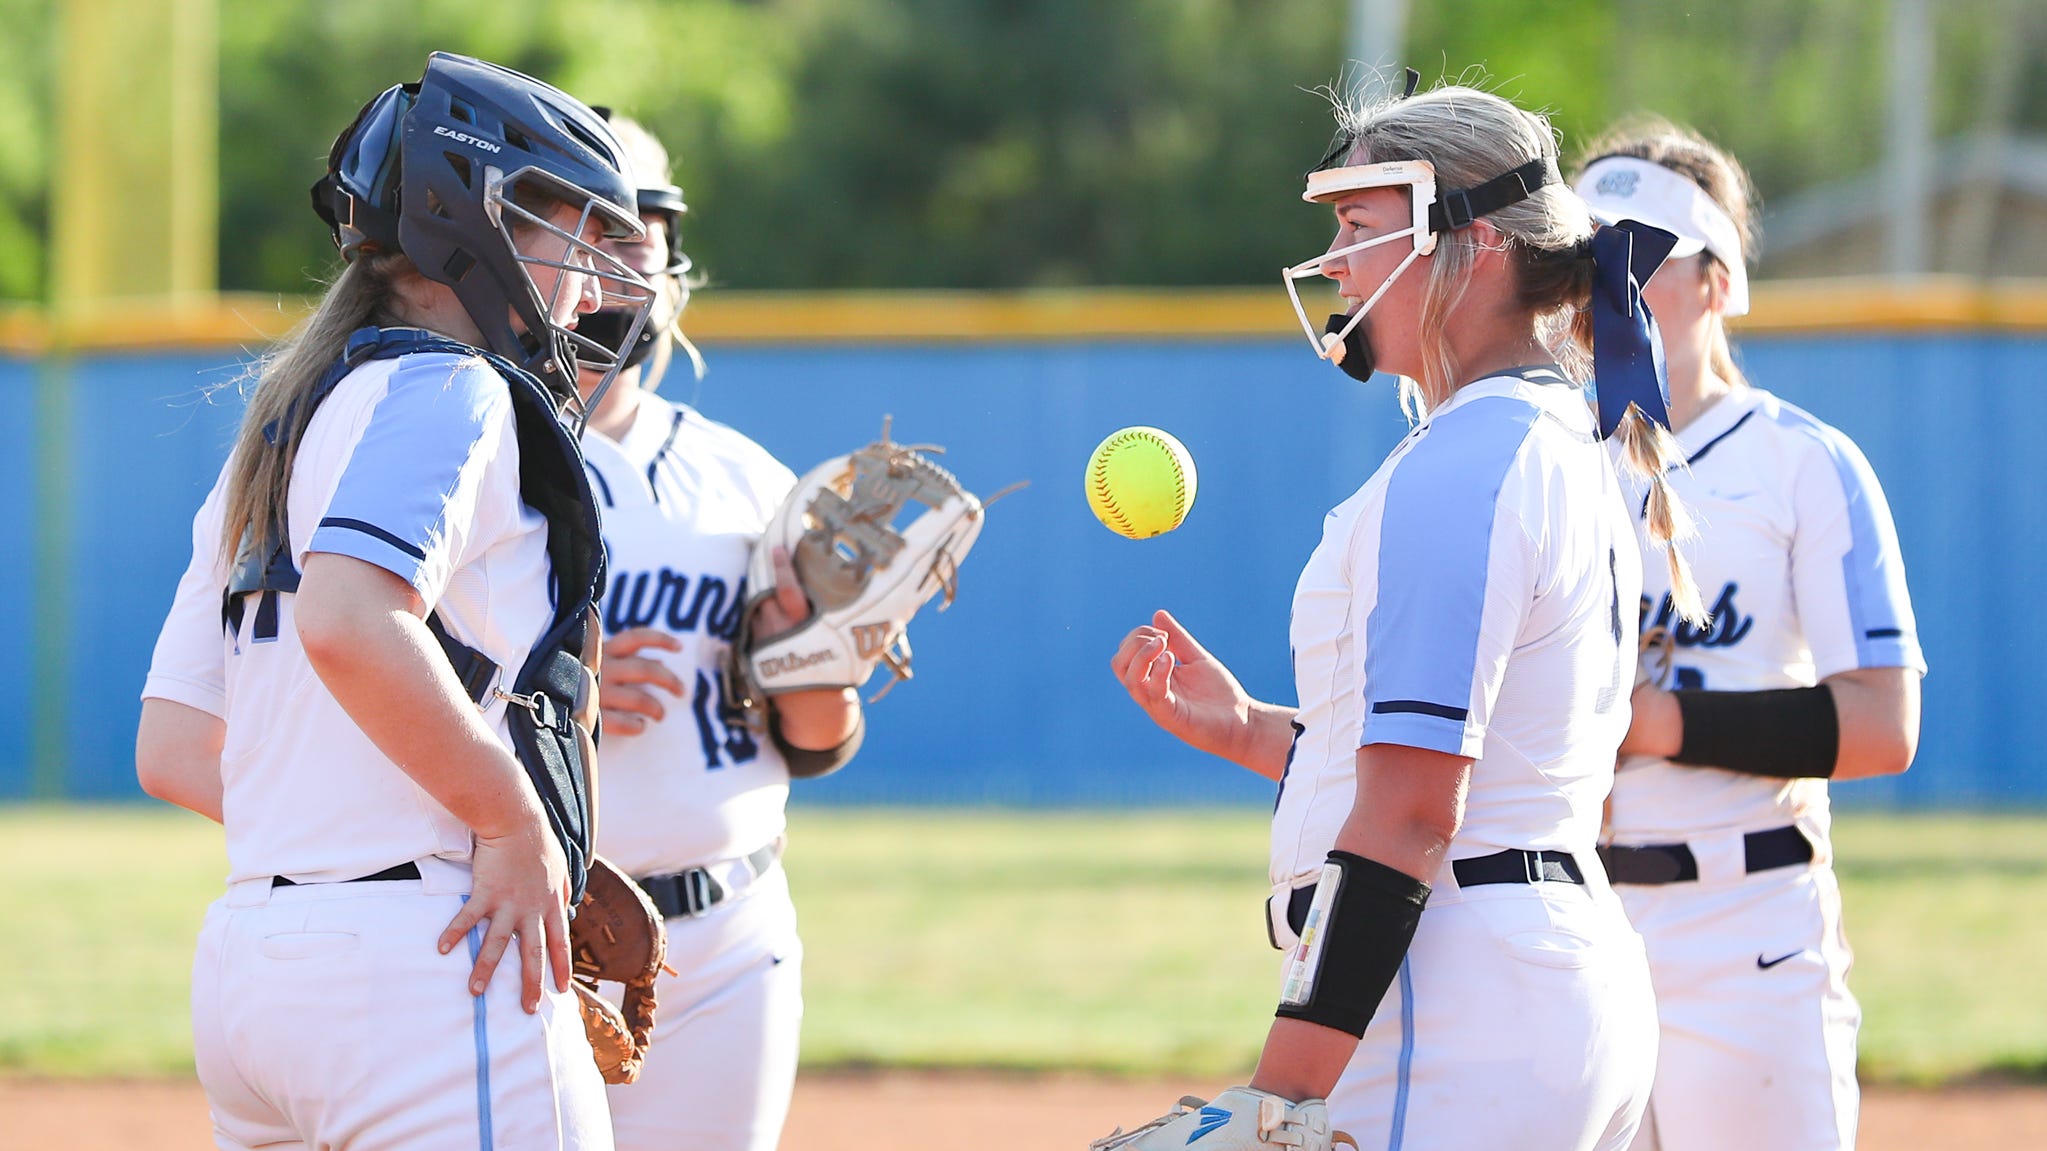 Difference makers Players to watch as NCHSAA softball playoffs begin